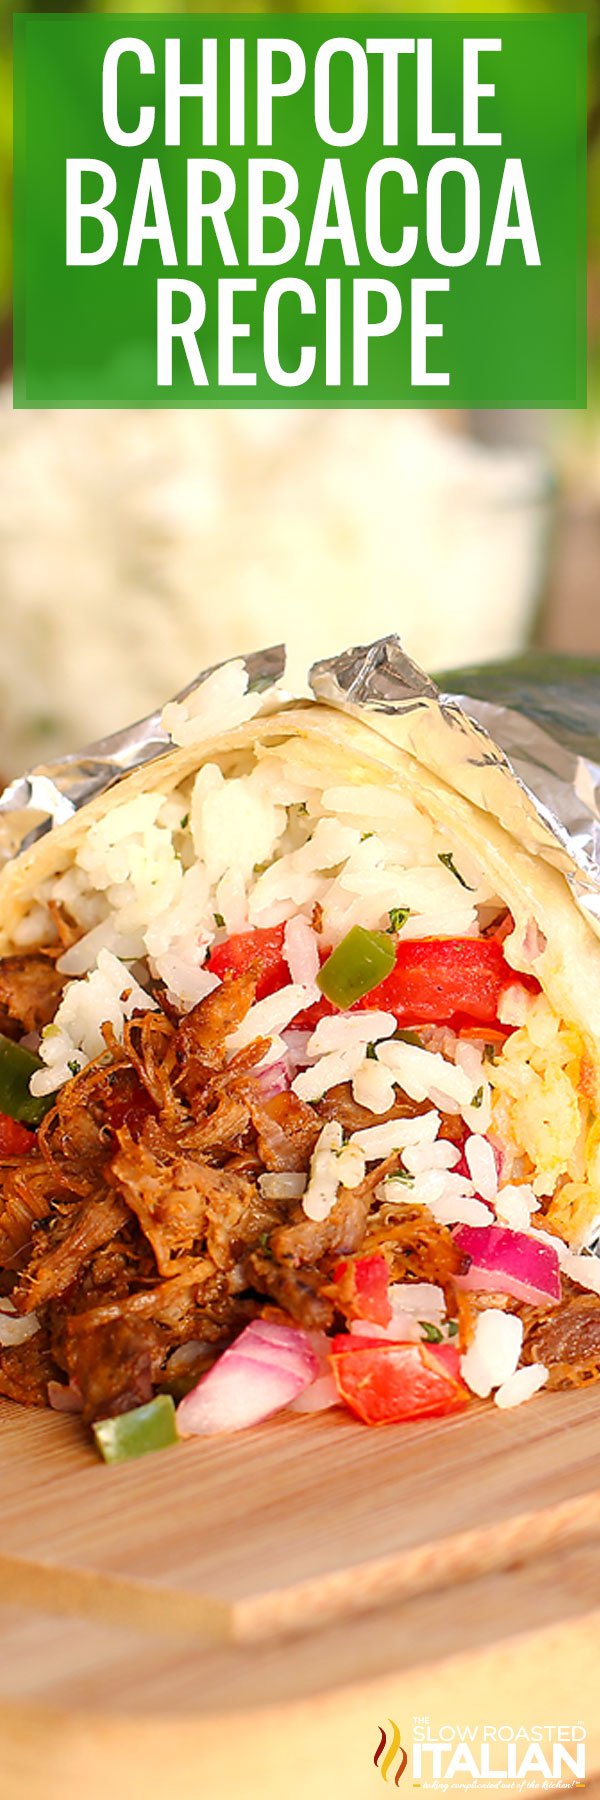 titled image (and shown): Chipotle barbacoa recipe